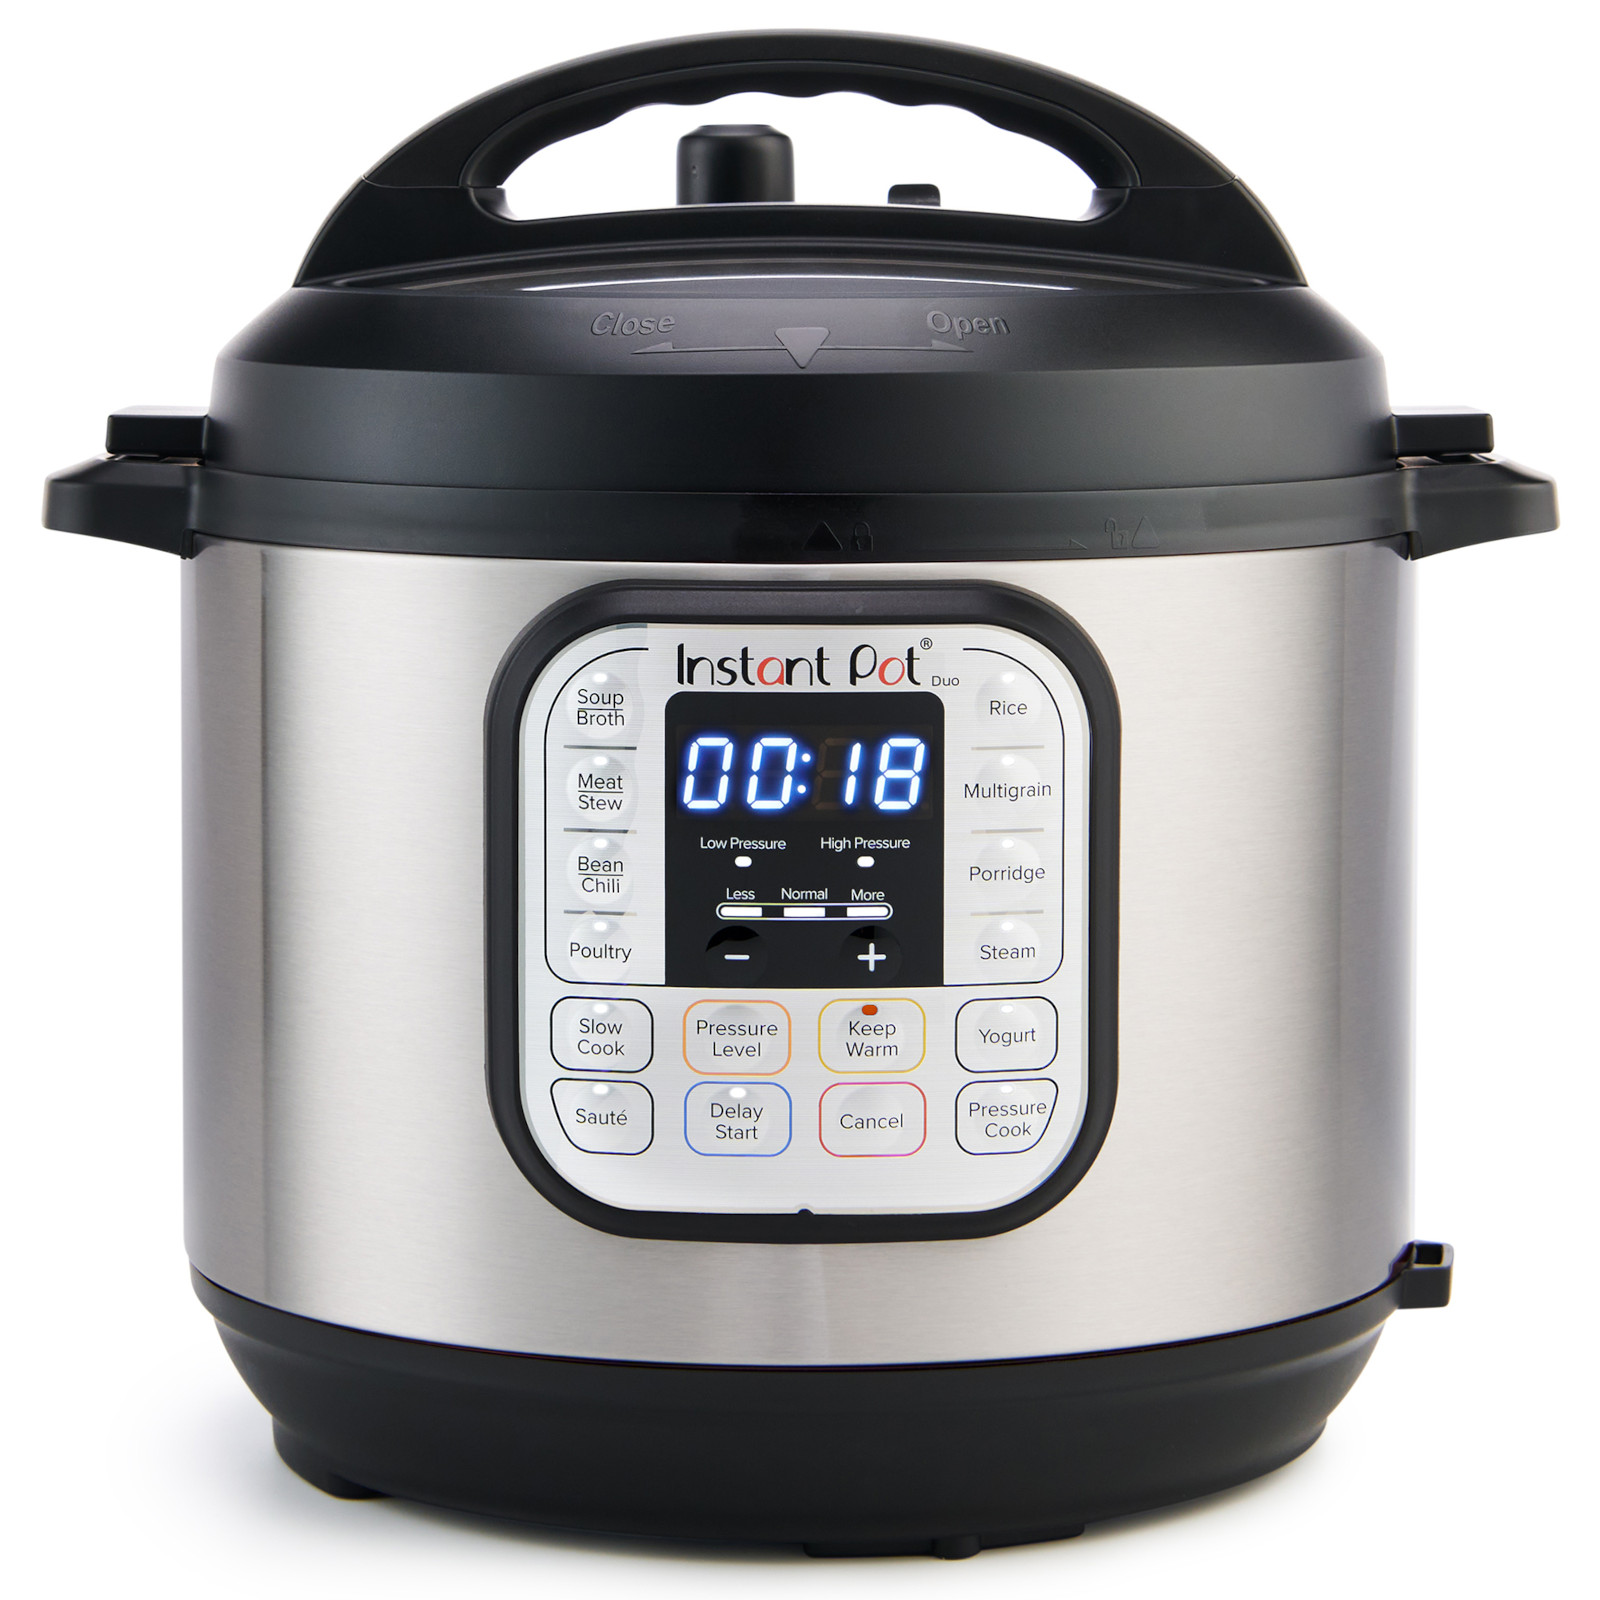 Instant Pot Duo 6 Qt Electric Pressure Cooker 7-in-1 with Easy-Release Steam Switch, Slow Cooker, Rice Cooker, Steamer and More - image 1 of 11